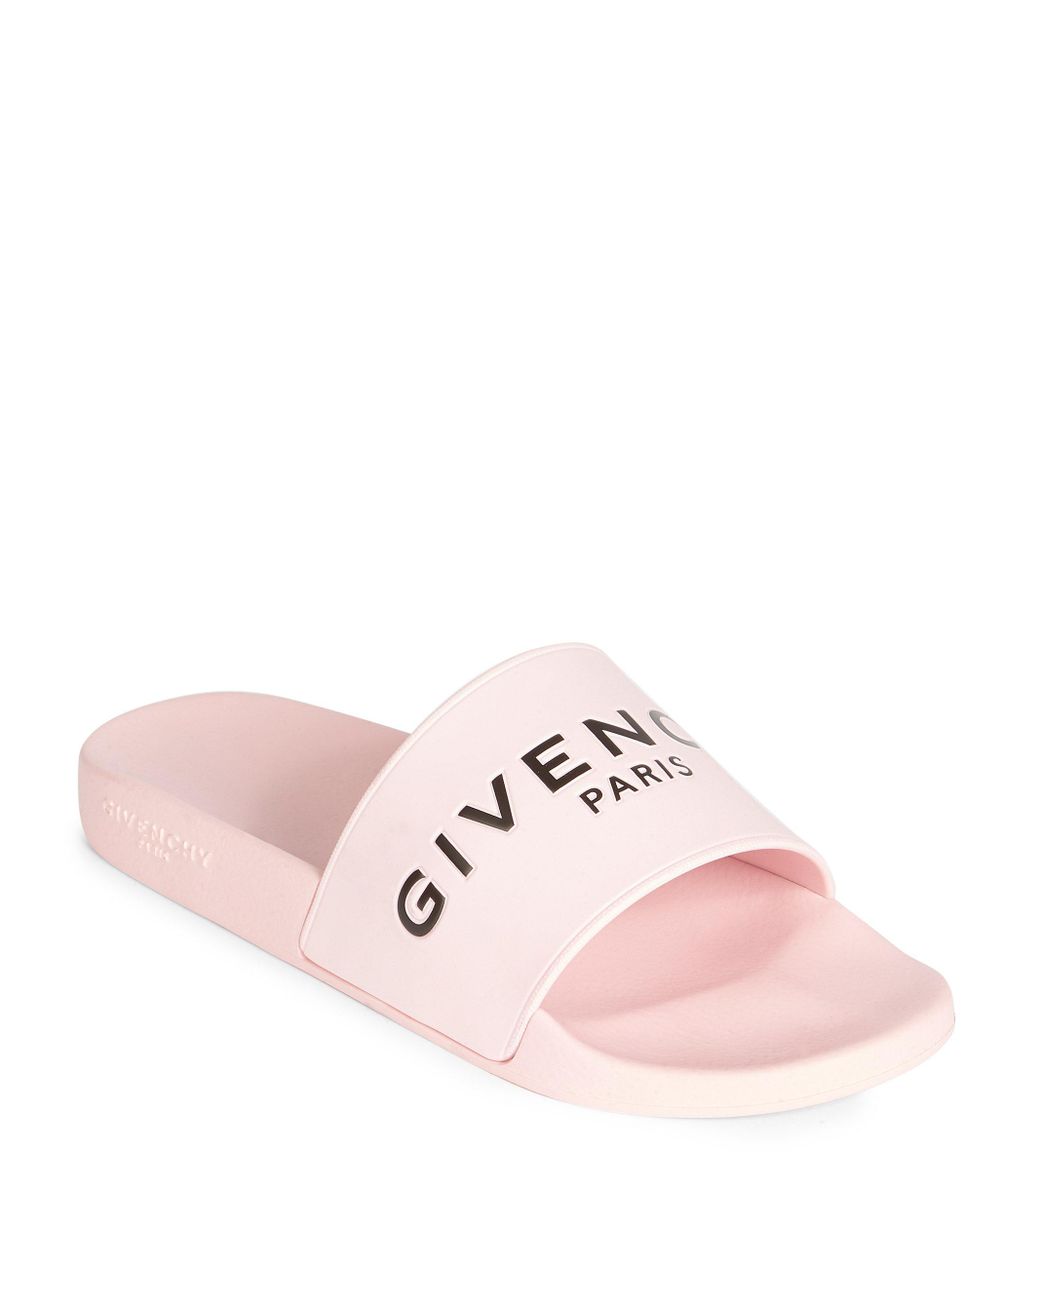 Total 67+ imagen pink and white givenchy slides